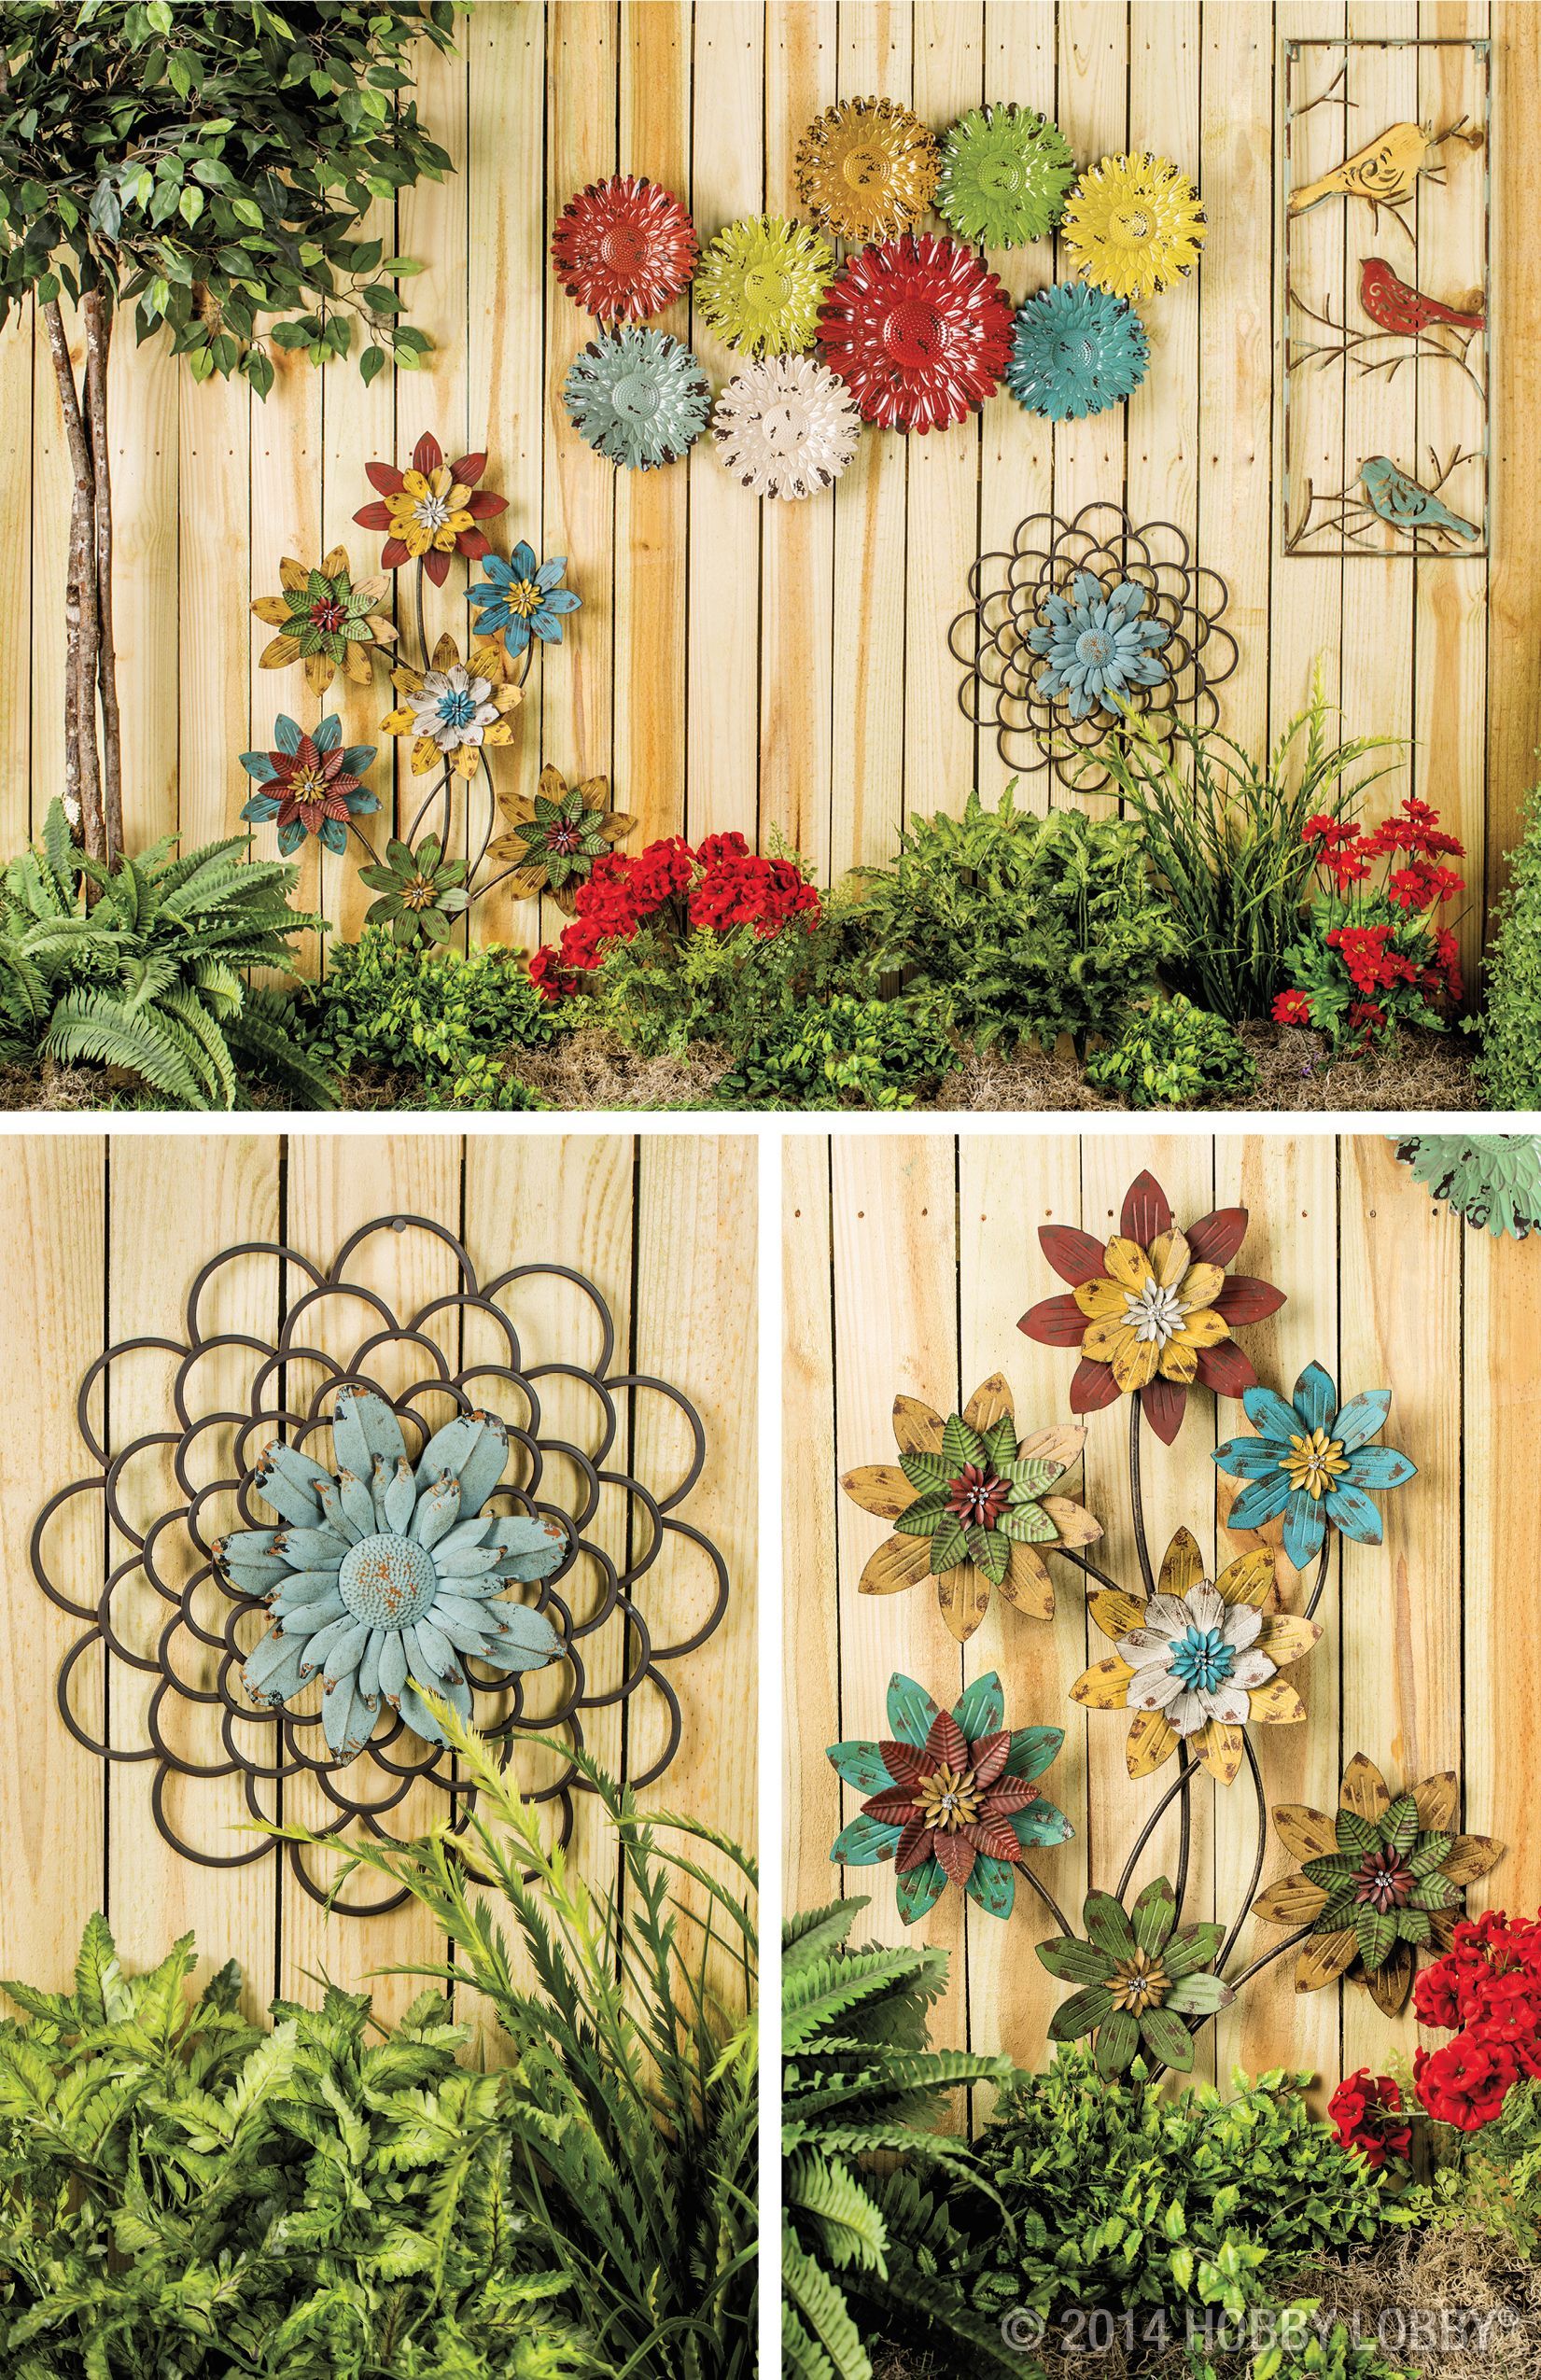 Search Results | Shop Hobby Lobby | Garden Wall Decor, Fence Art, Flower Art Within Current Flower Garden Wall Art (View 13 of 20)